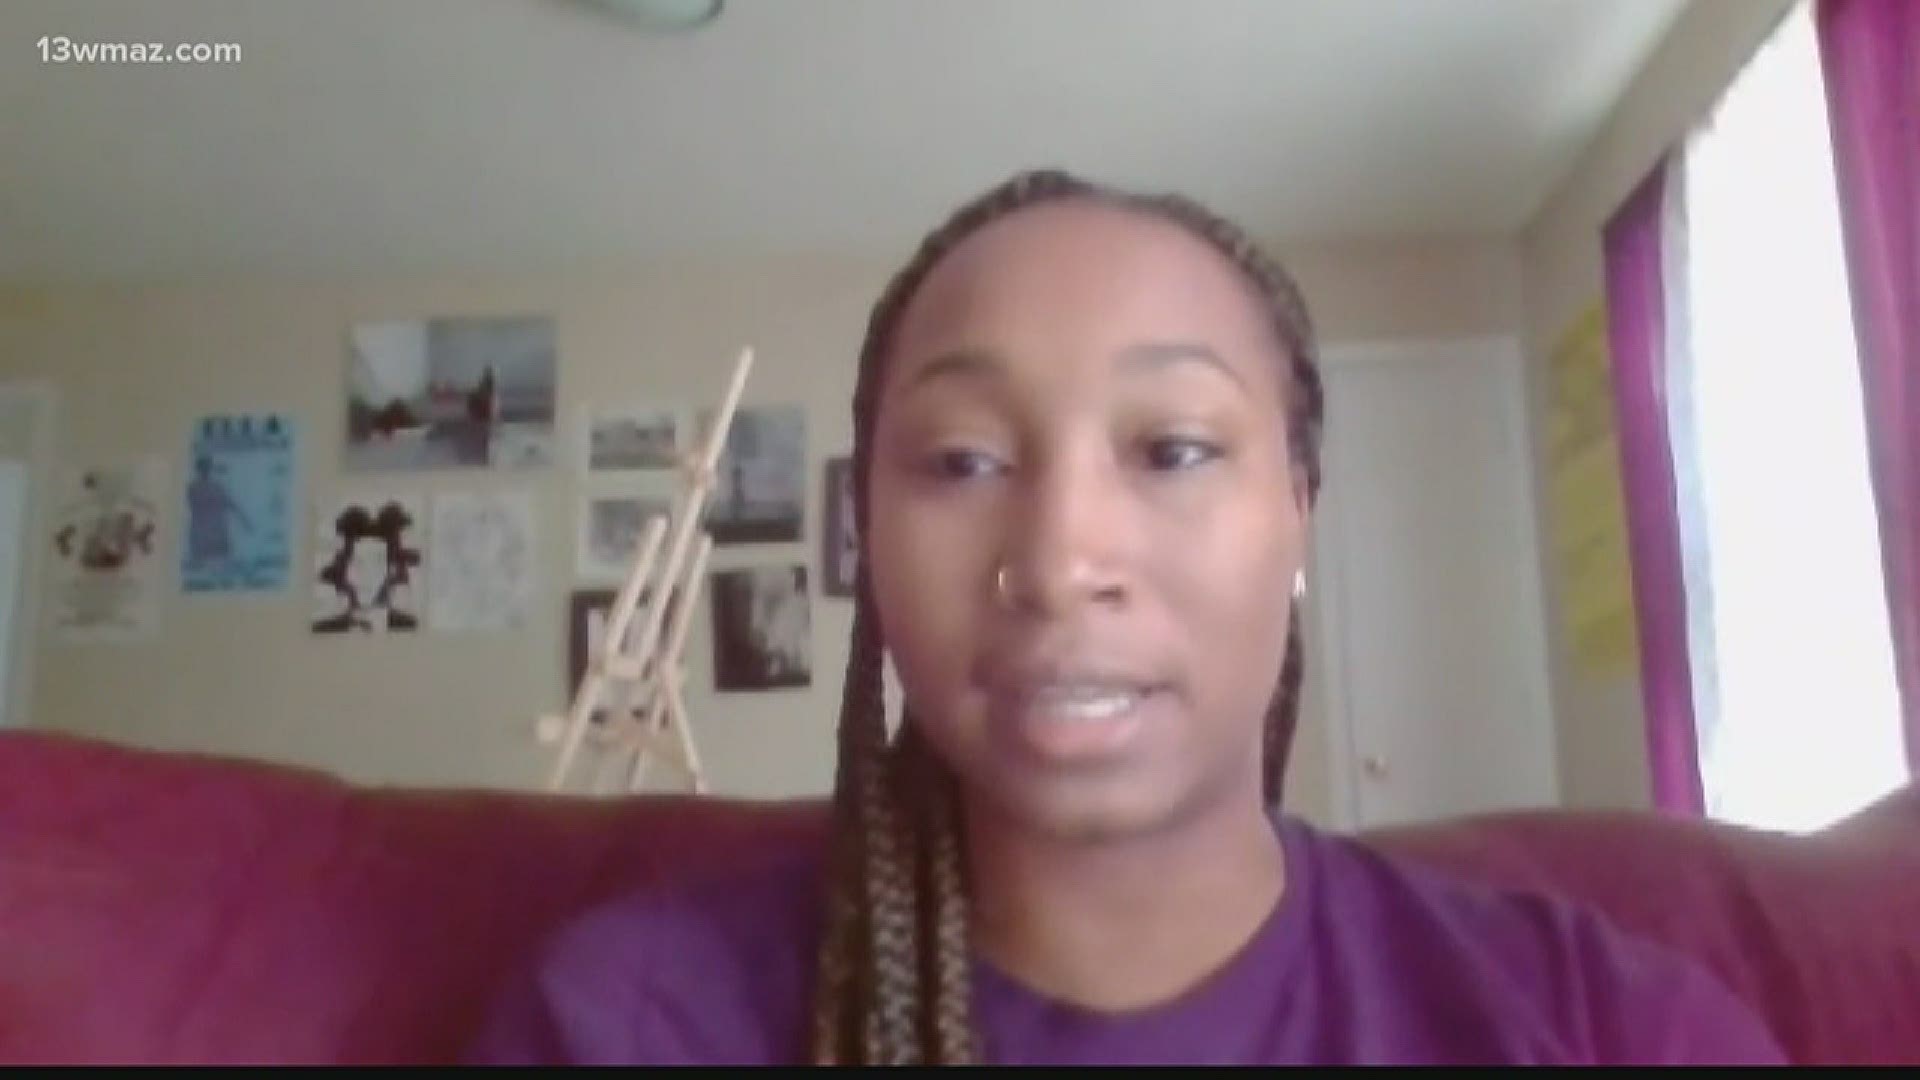 Wanya Reese talked with Afrika Hamilton, a school counselor at Howard Middle School, about her views on the current racial climate and other topics.